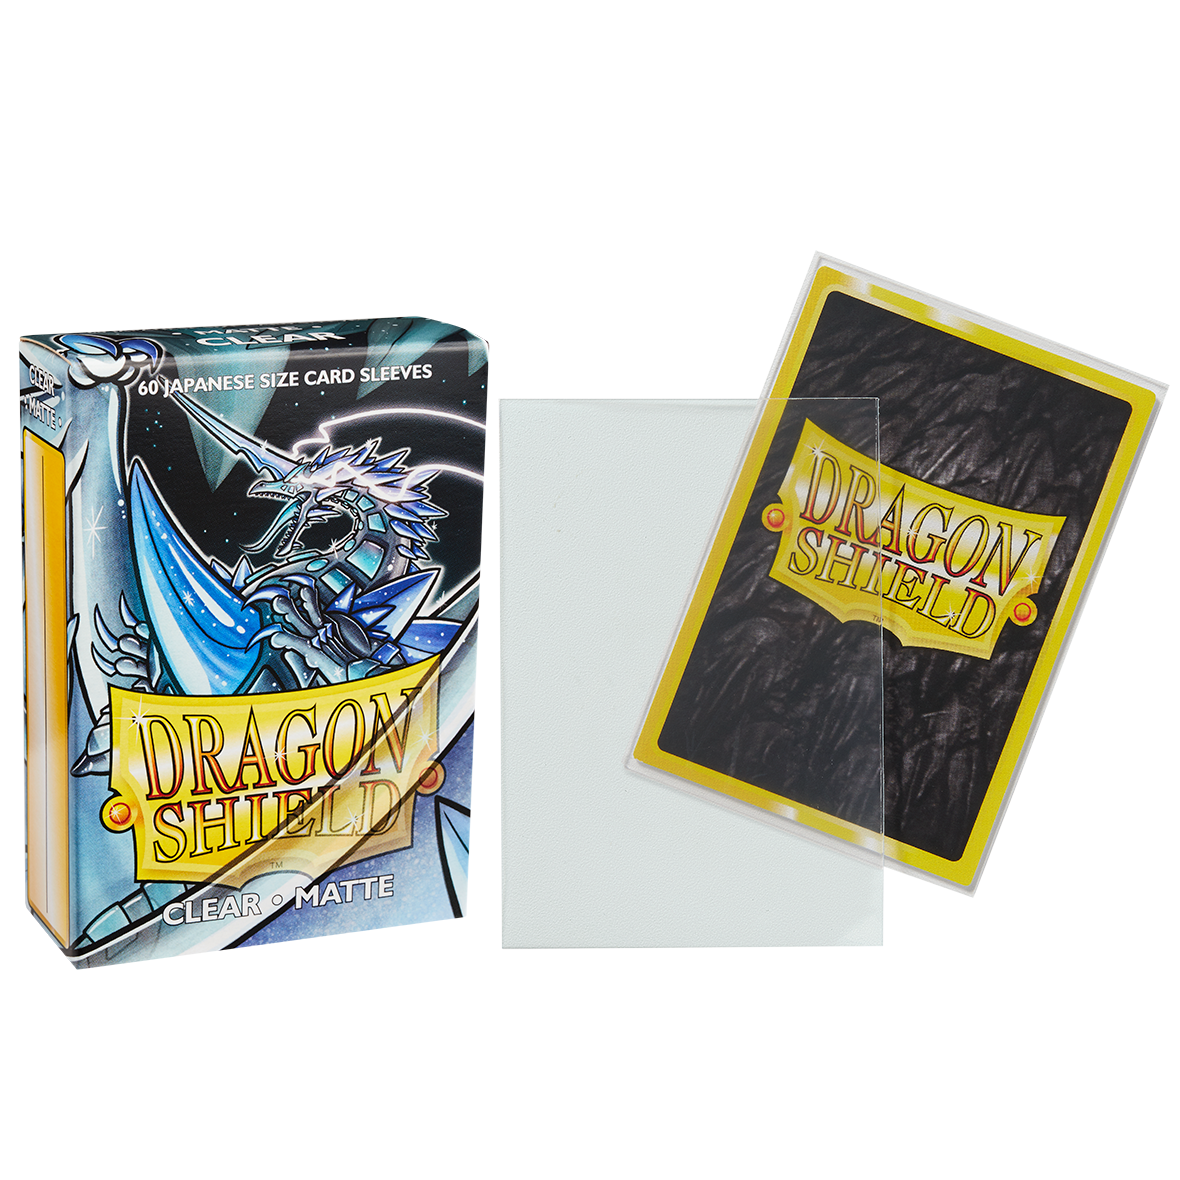 Dragon Shield Sleeve Matte Small Size 60pcs - Clear Matte (Japanese Size)-Dragon Shield-Ace Cards &amp; Collectibles